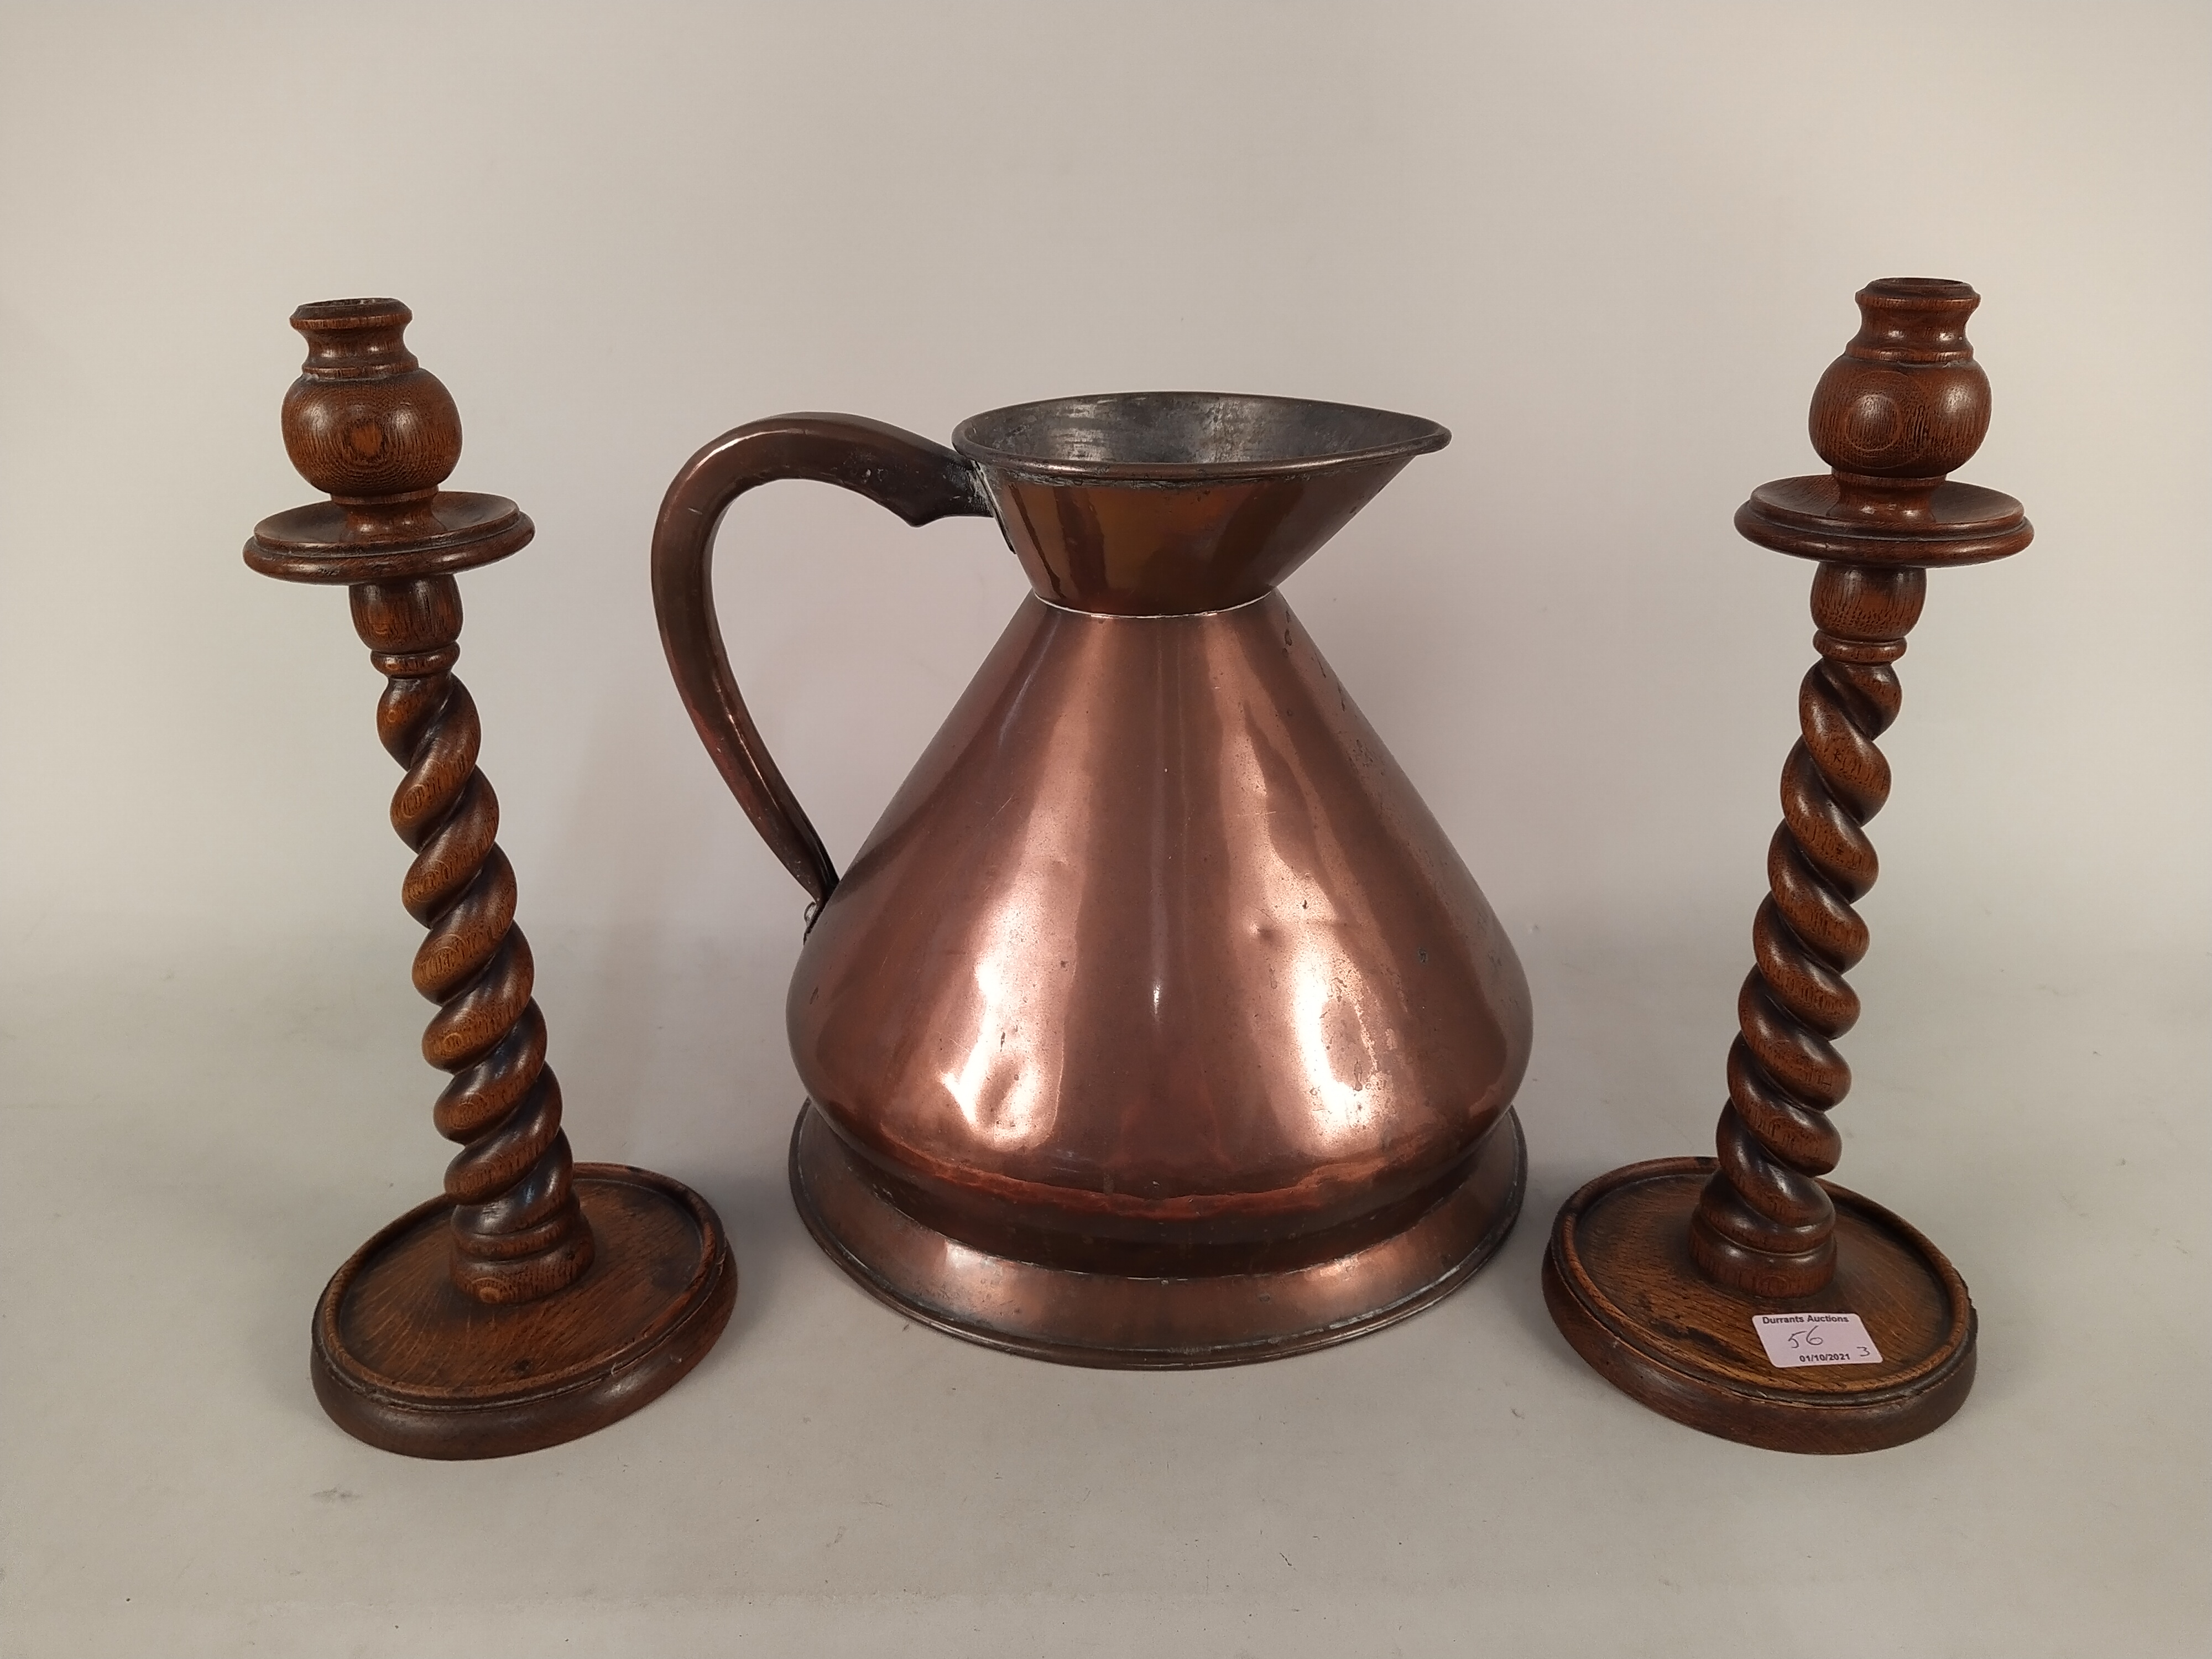 A pair of 1920's oak barley twist candlesticks, a copper jug stamped "2 gallons V.R. - Image 3 of 3